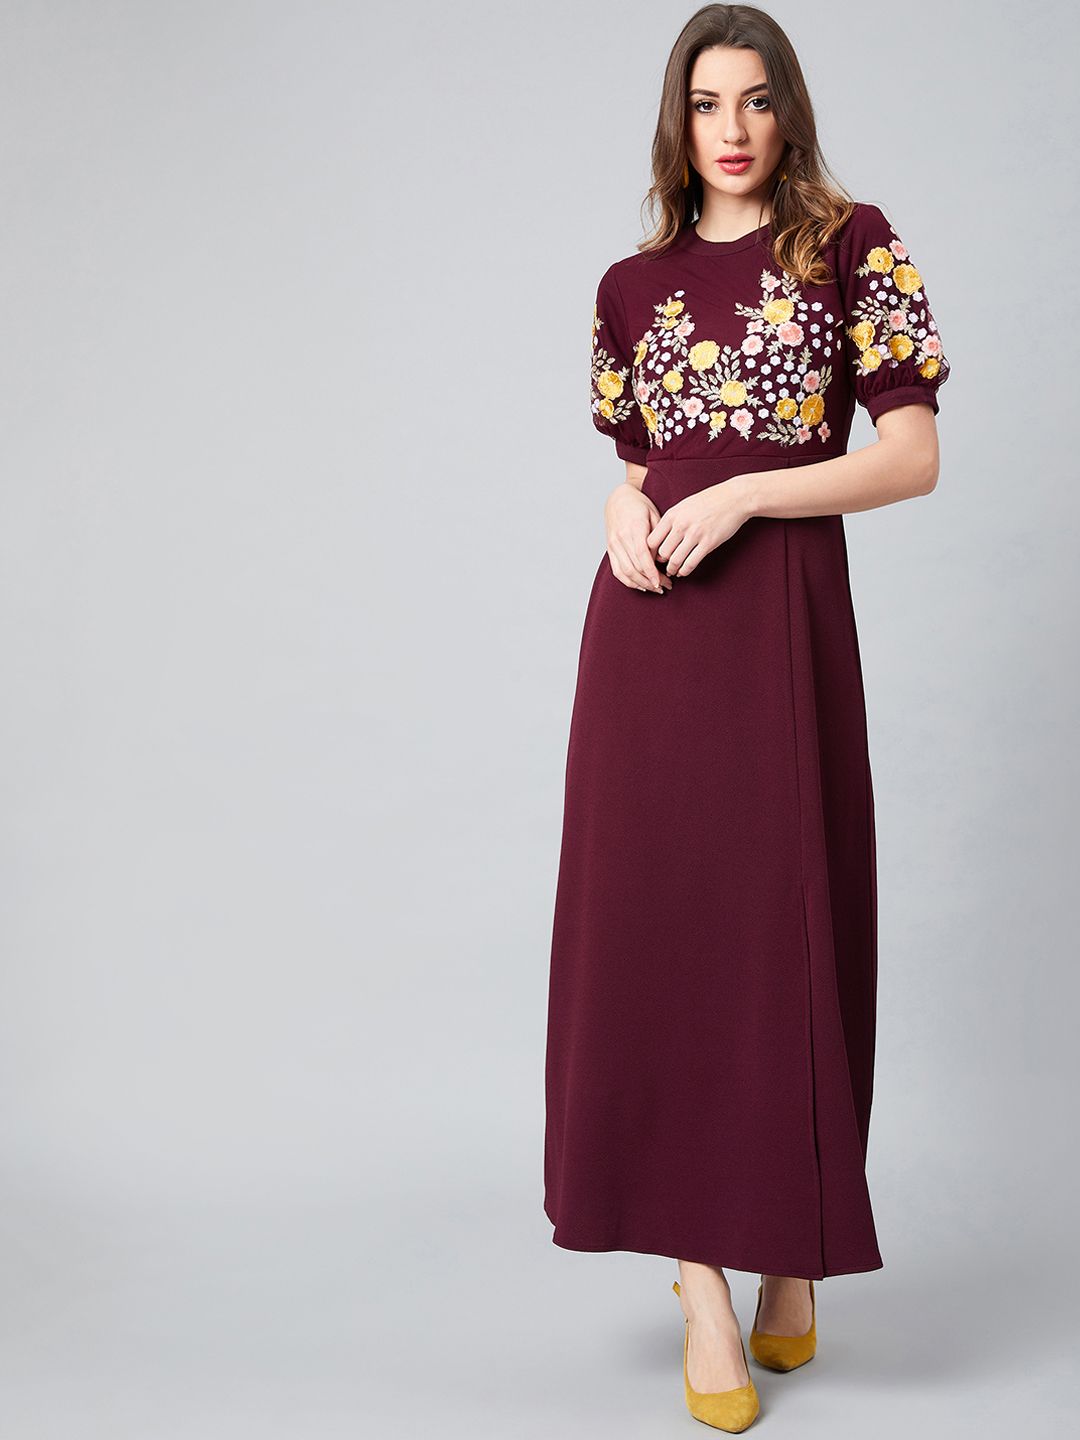 Athena Maroon & Yellow Embroidered Maxi Dress Price in India